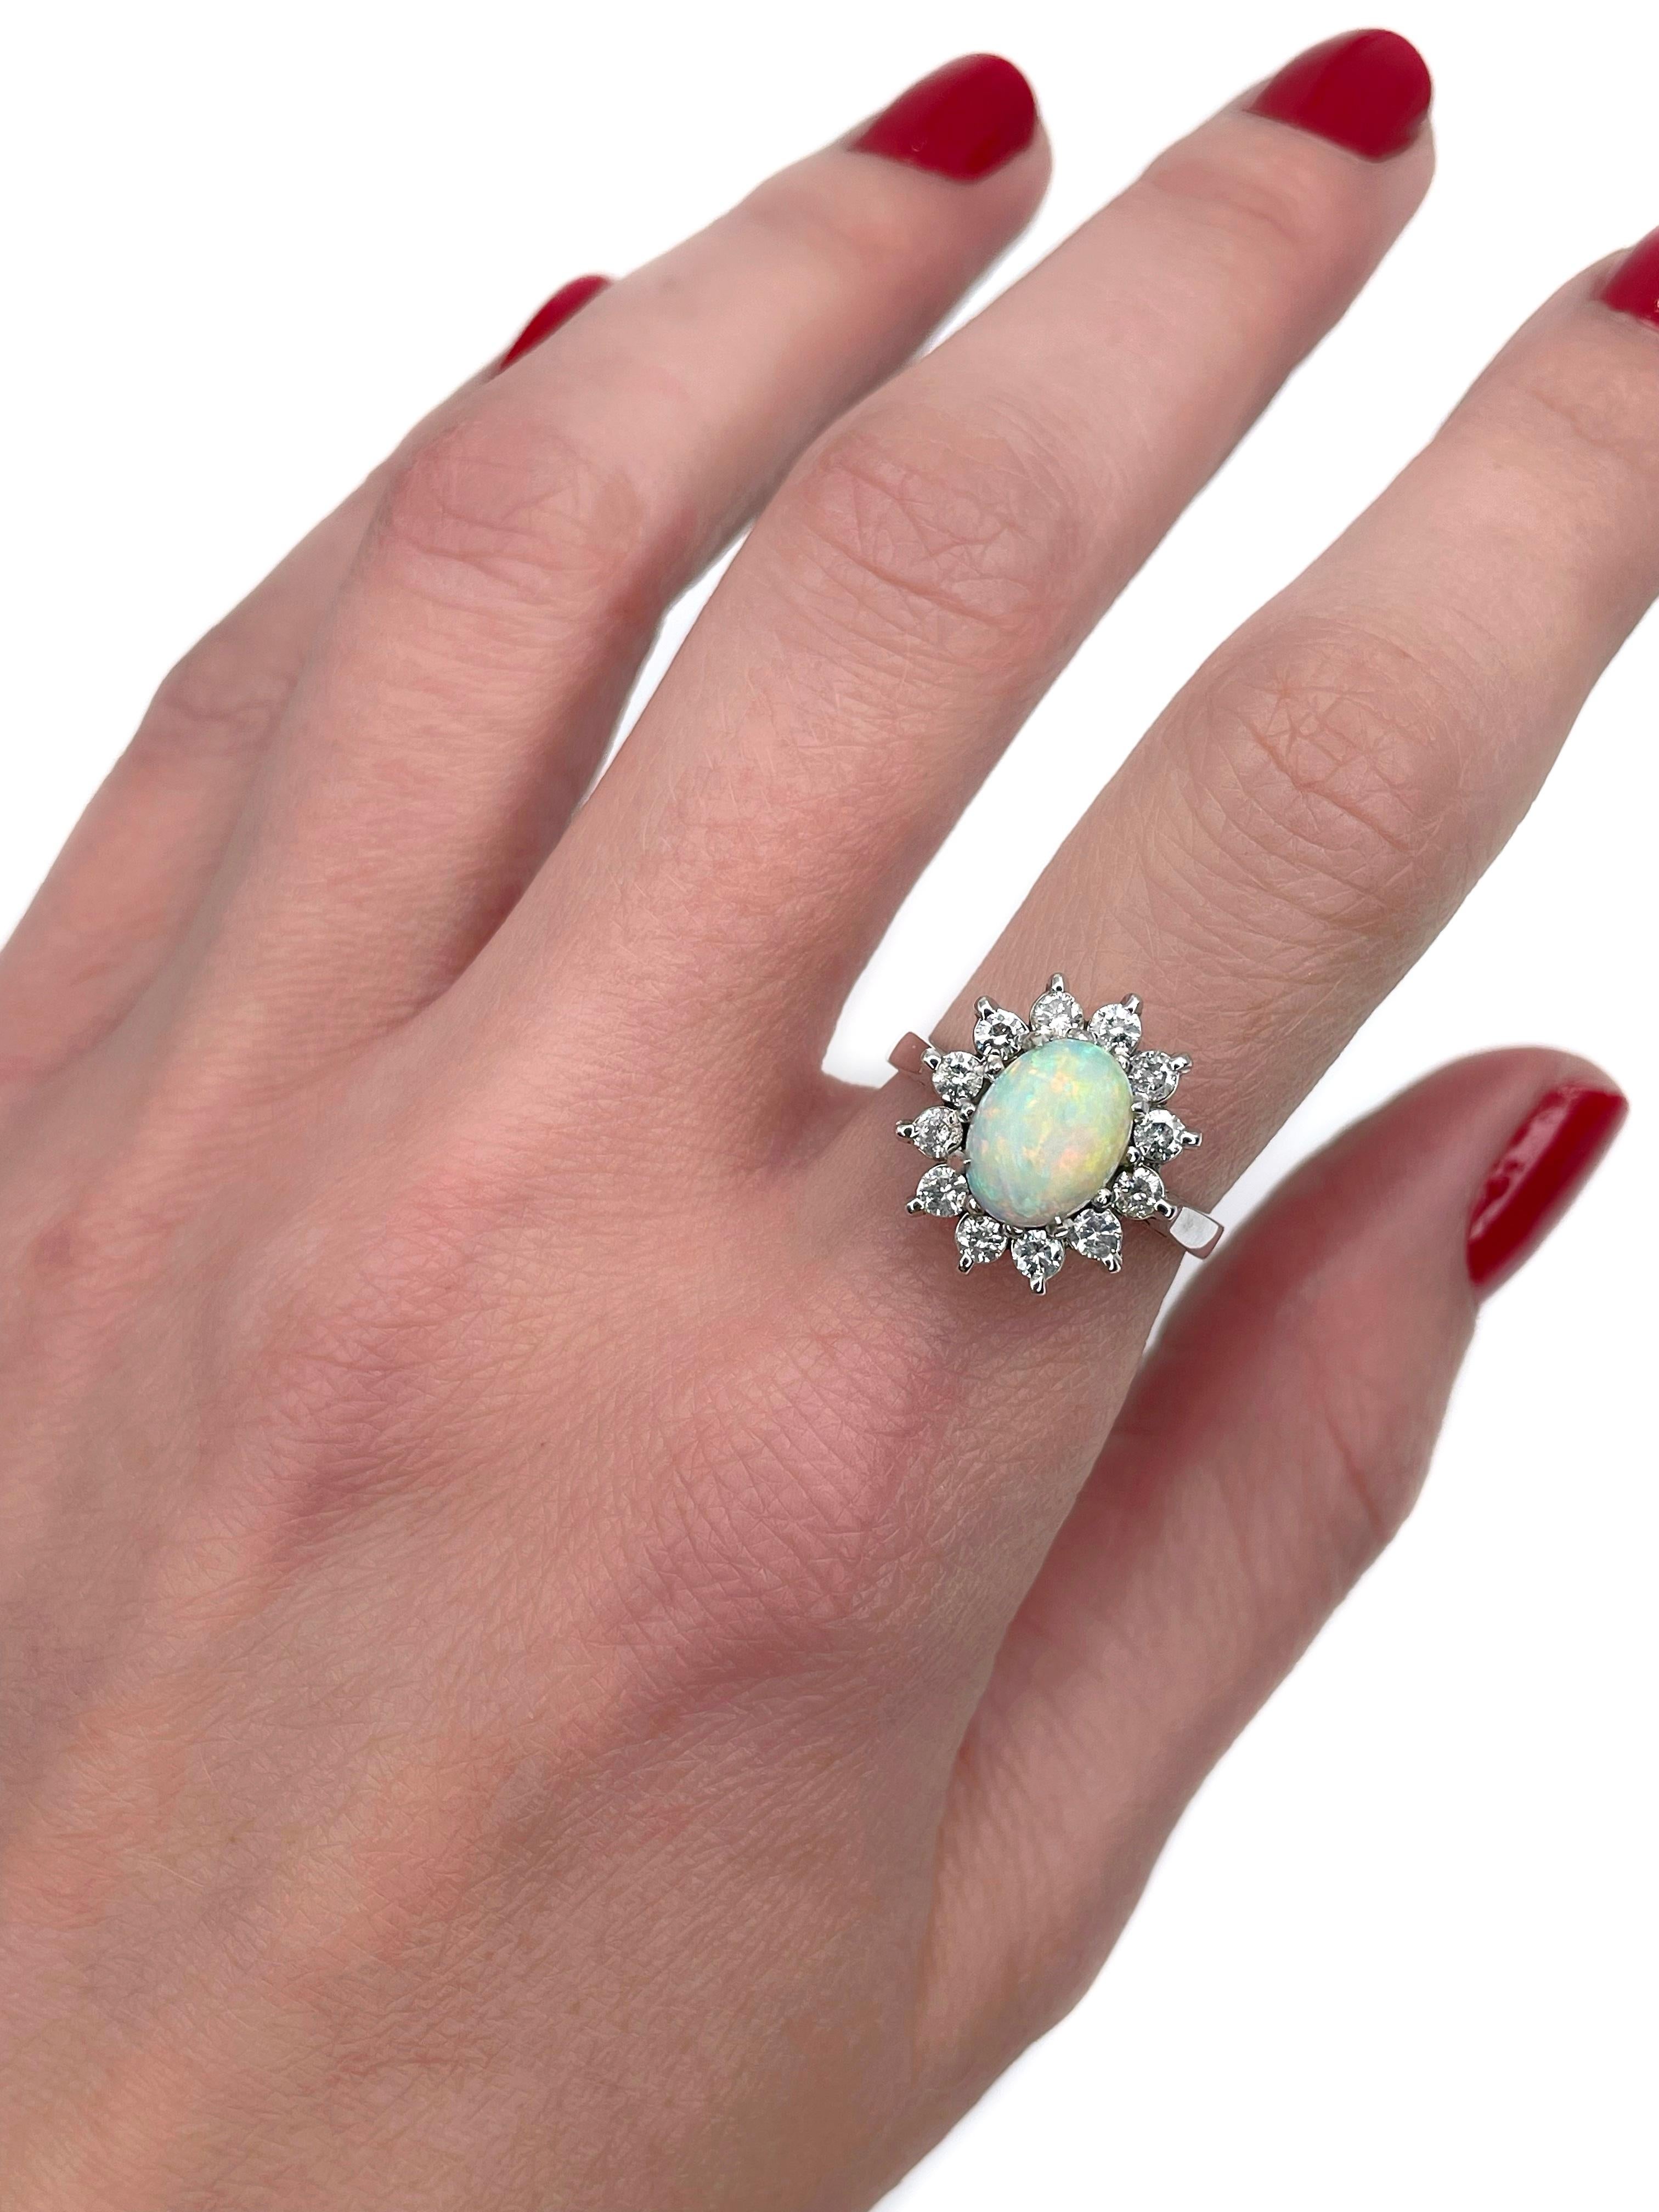 This is a vintage cluster ring crafted in 18K white gold. Circa 1980. 

It features:
- 1 opal, oval cabochon cut
- 12 diamonds, brilliant cut, TW 0.50ct, RW-W, P2

Weight: 5.18g
Size: 17 (US 6.75)

IMPORTANT: please ask about the possibility to